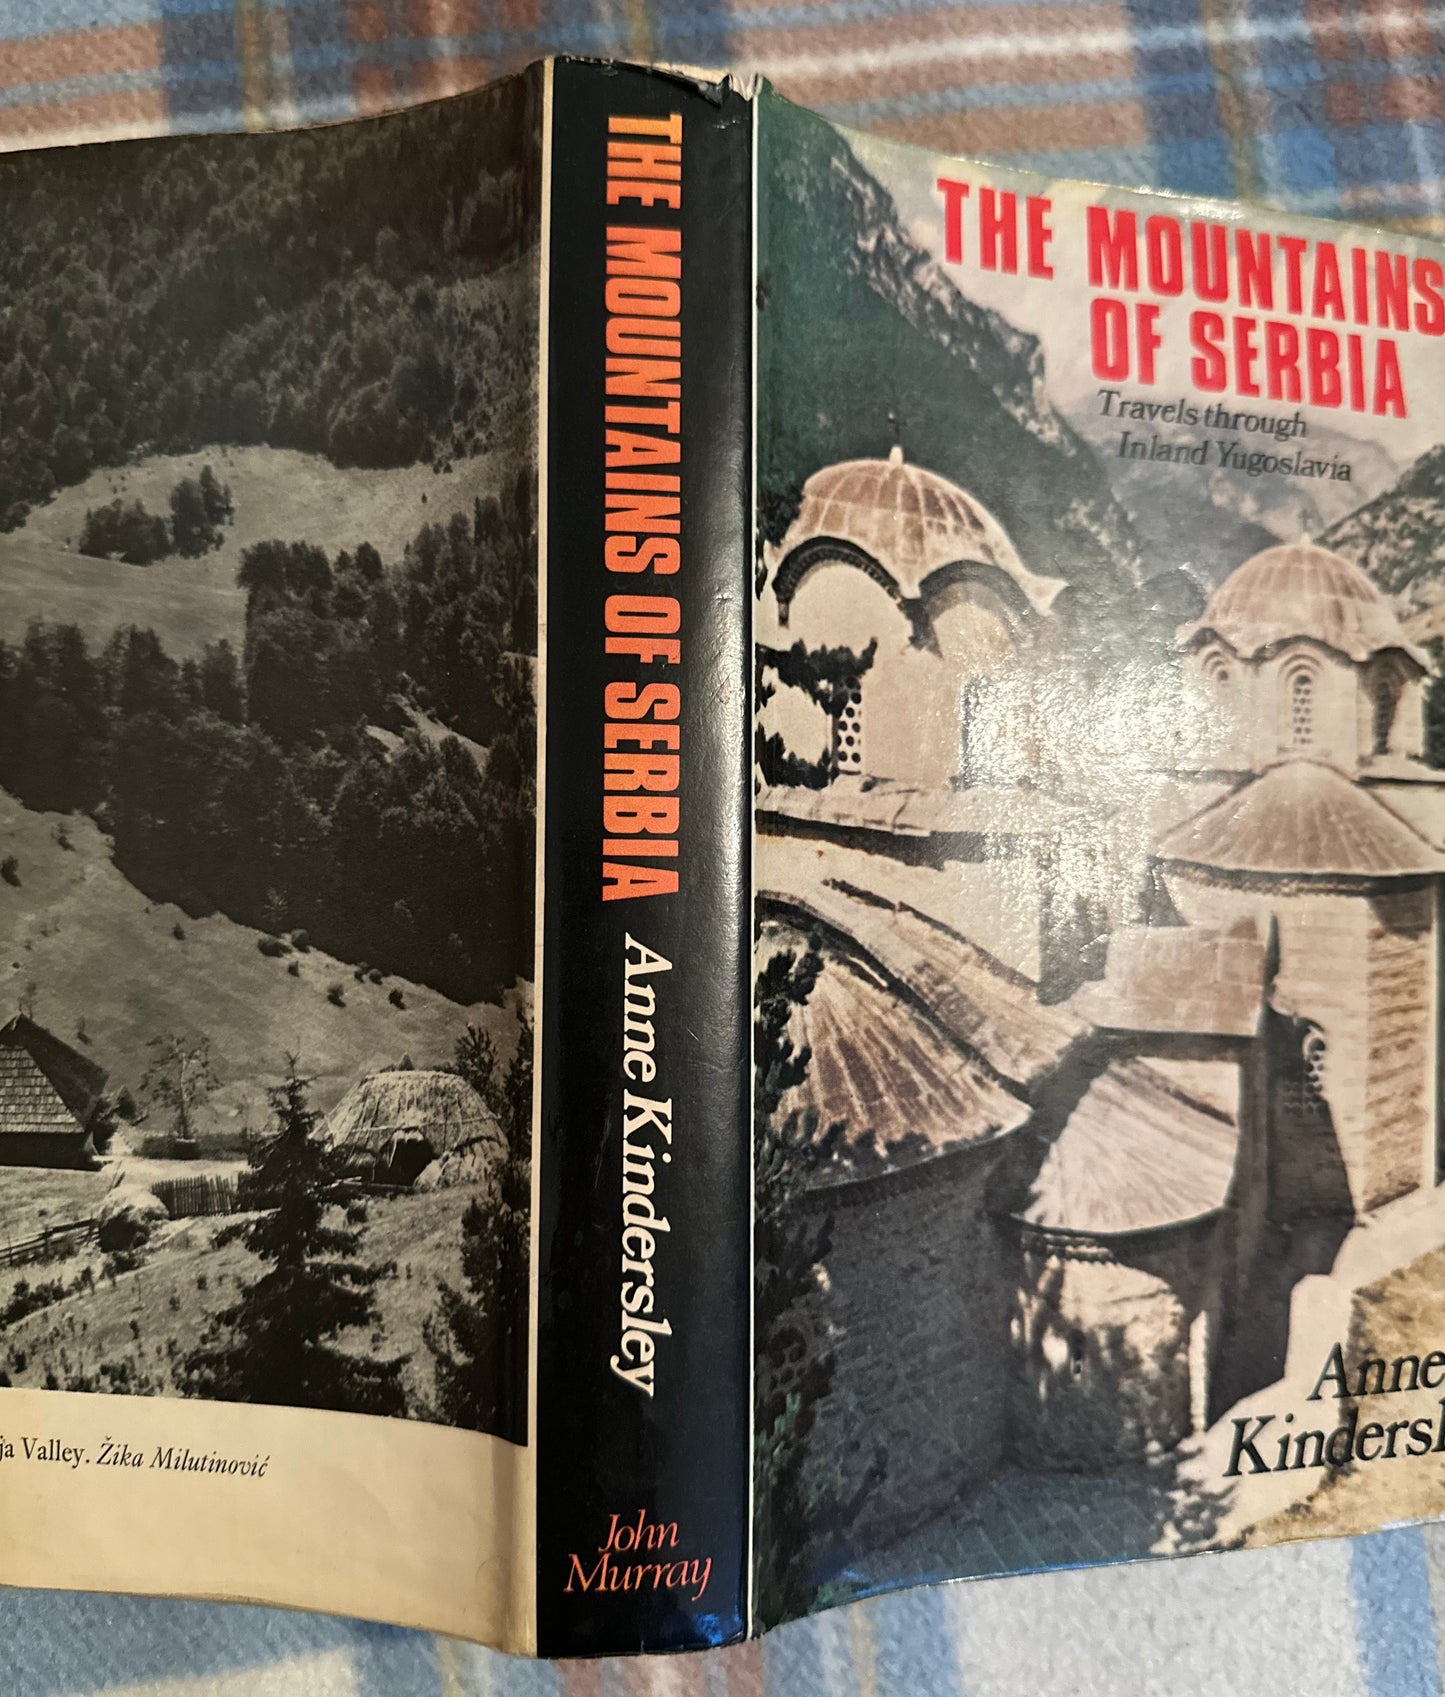 1976*1st* The Mountains Of Serbia: Travels Through Inland Yugoslavia - Anne Kindersley(John Murray publisher)